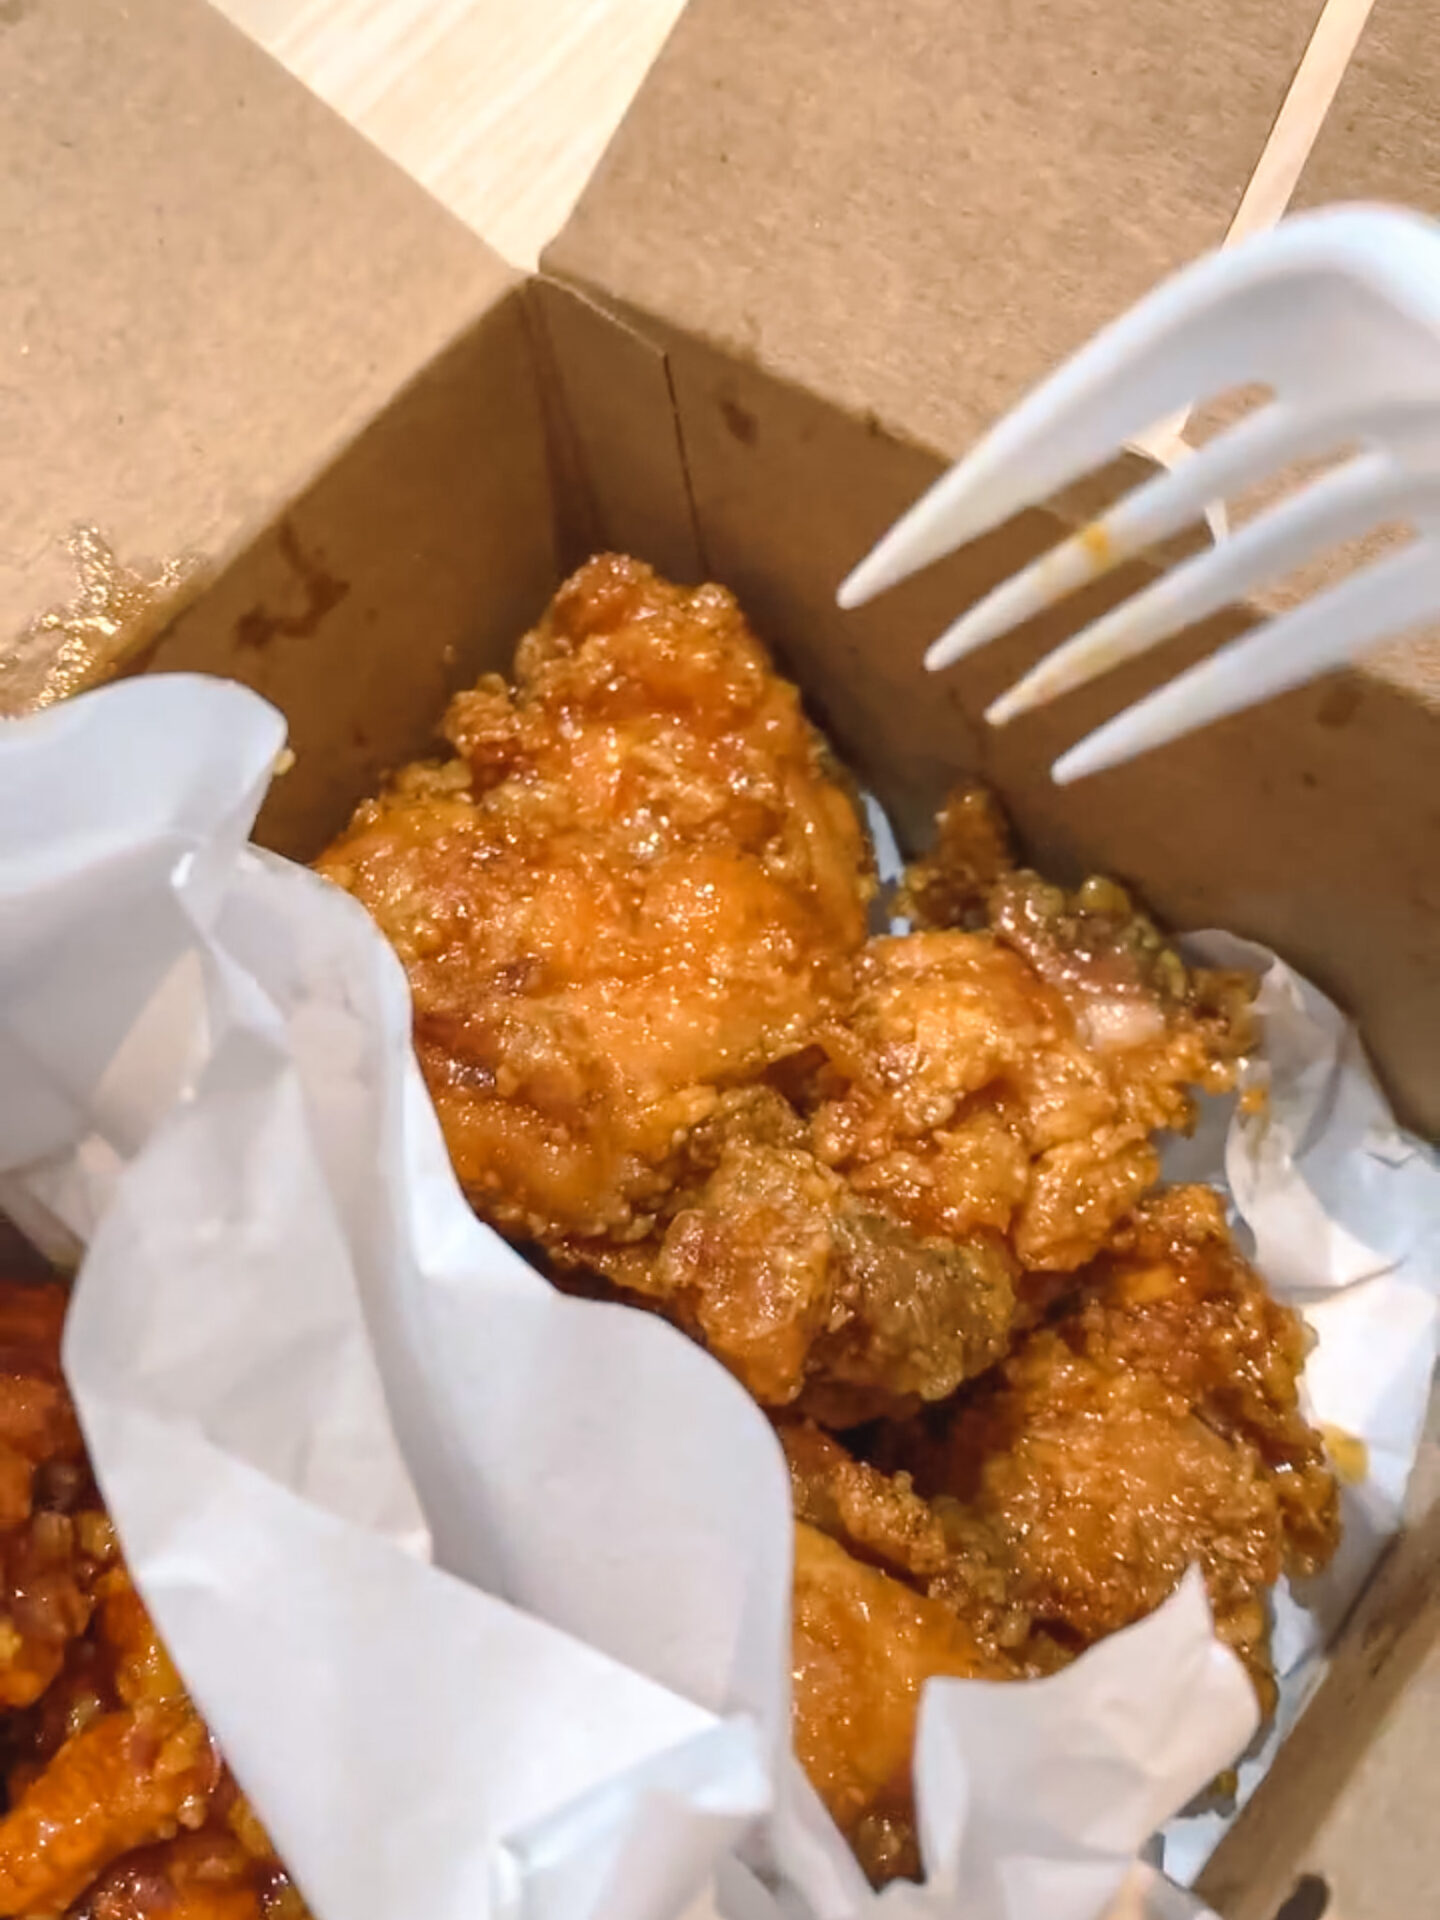 Soy garlic fried chicken from Chicko Chicken in Vancouver, British Columbia